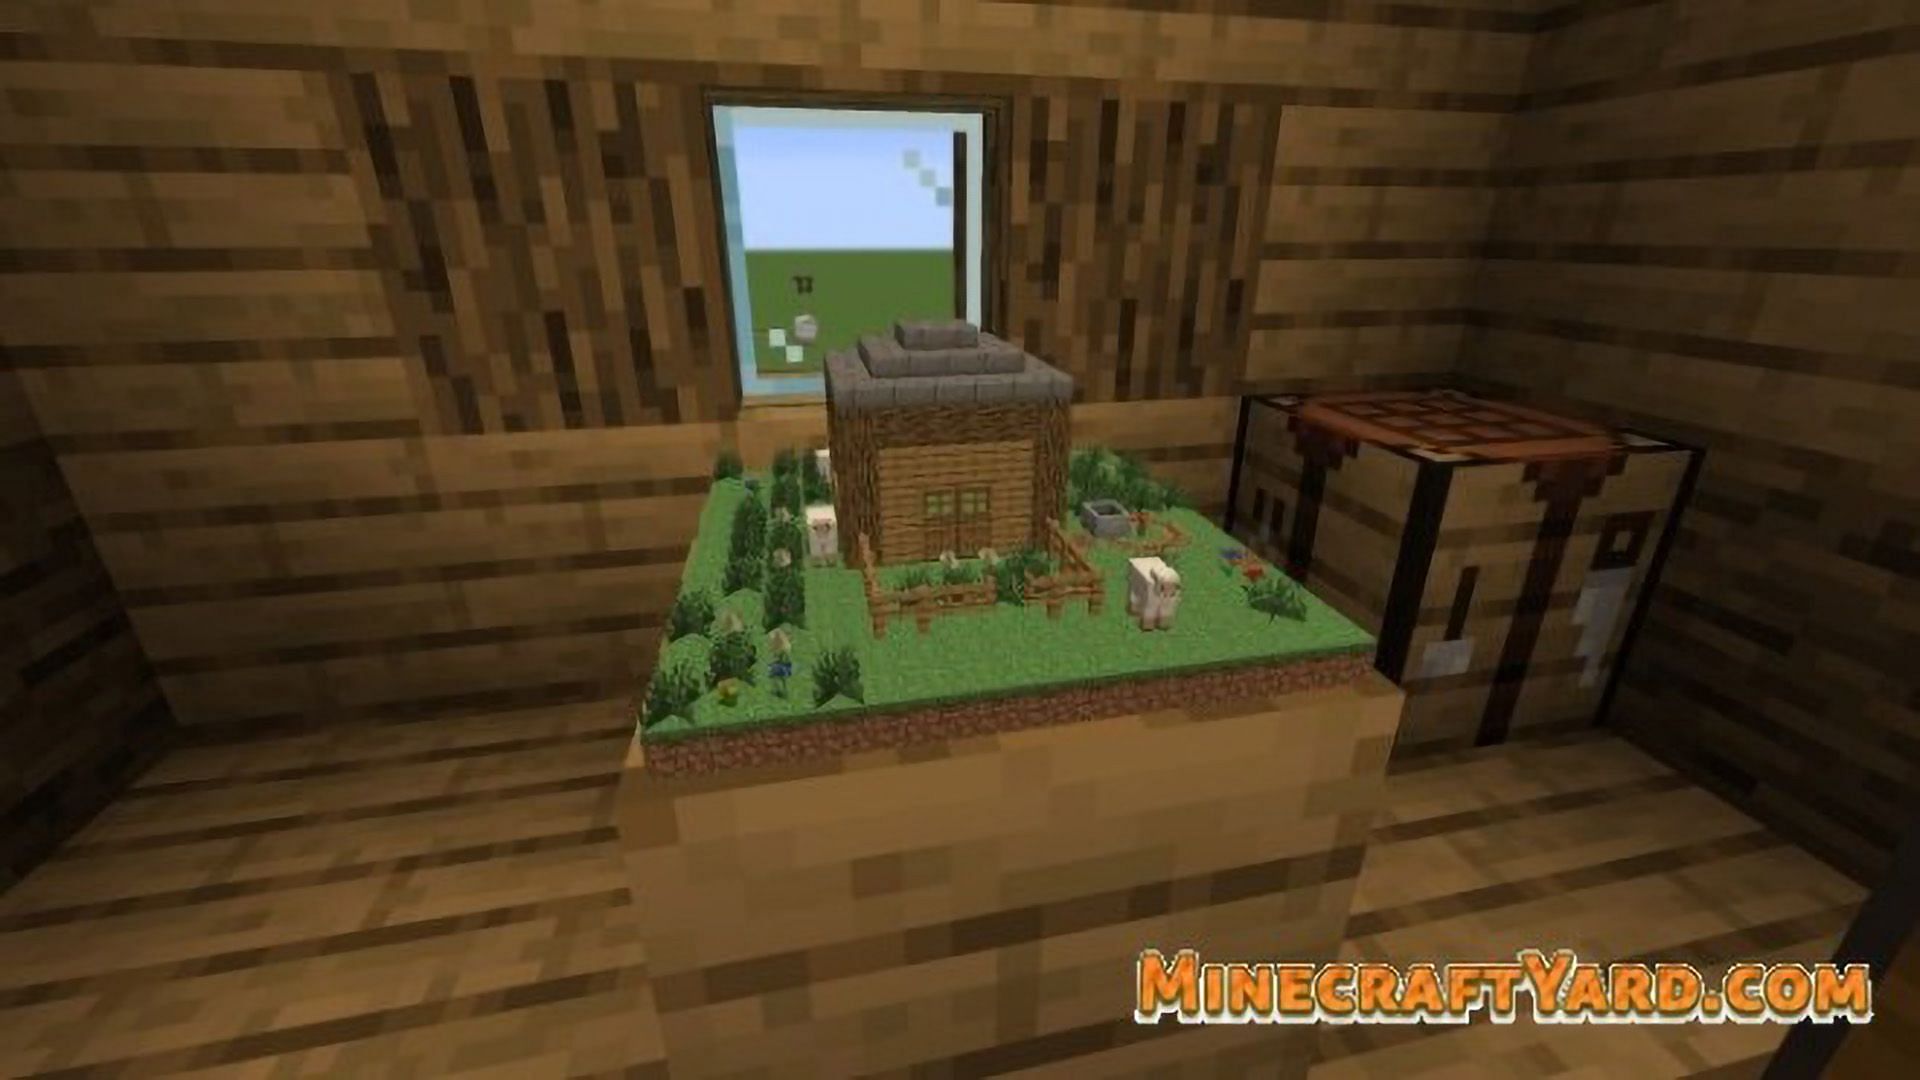 Get yourself a fully accessible miniaturized home (Image via minecraftyard.com)